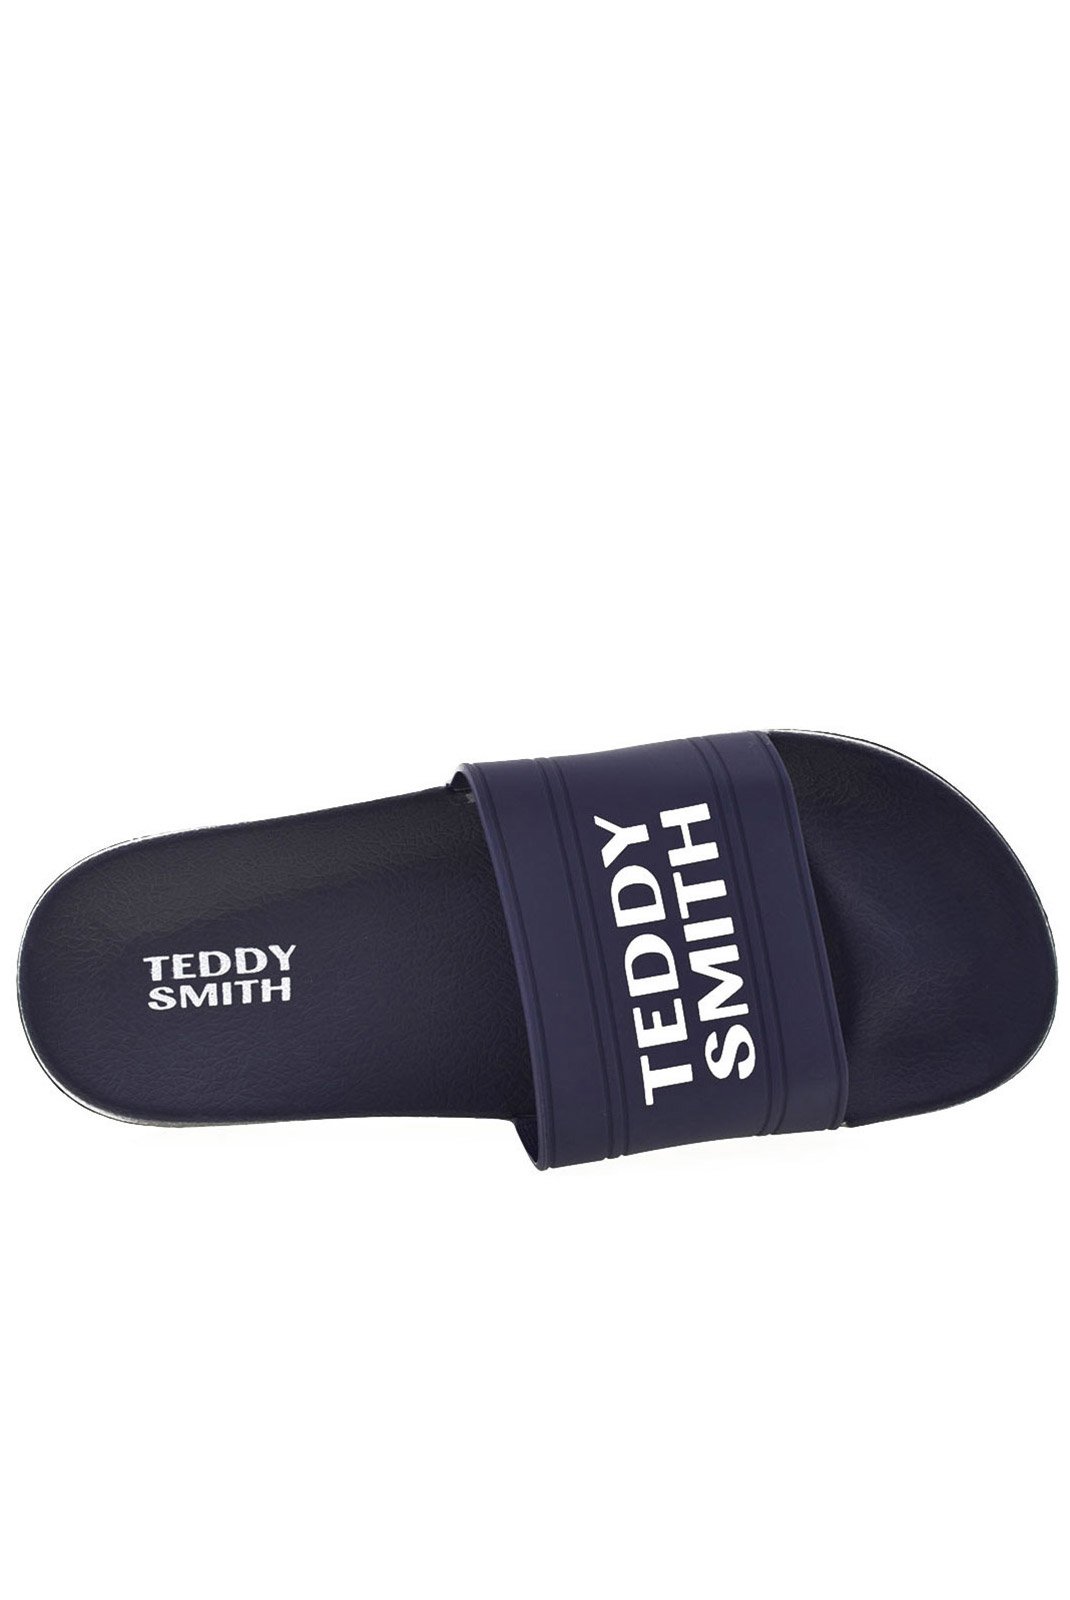 Chaussures   Teddy smith 71744 NAVY